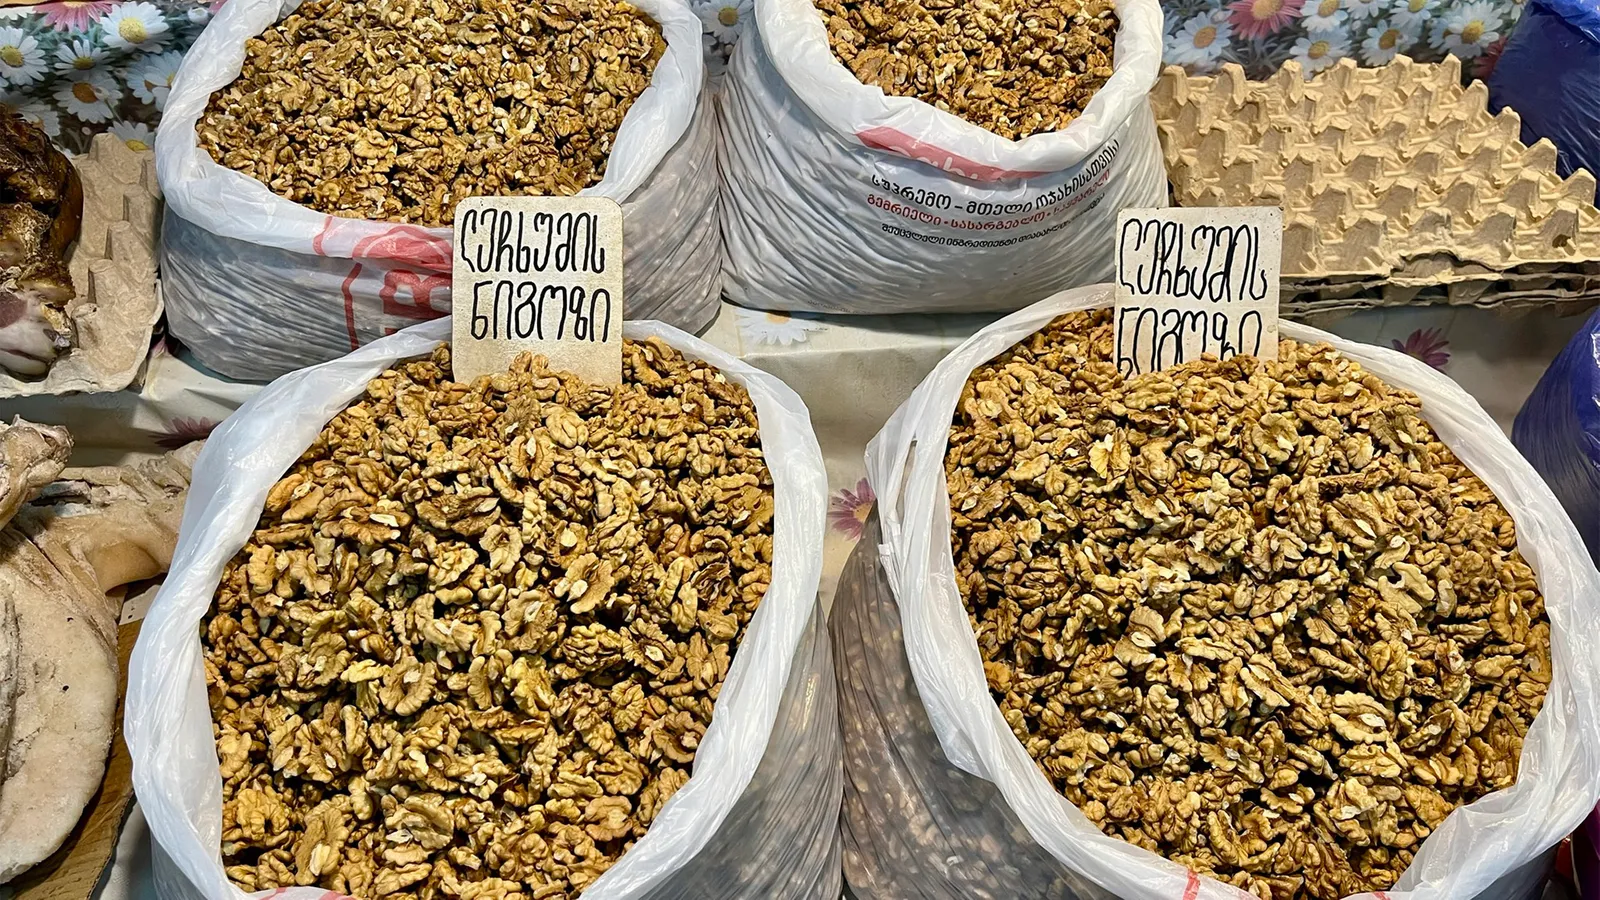 In Georgia, walnuts typically form the base of a seasoned vegetable paste known as bazhe (Credit: Sarah Freeman and BBC)